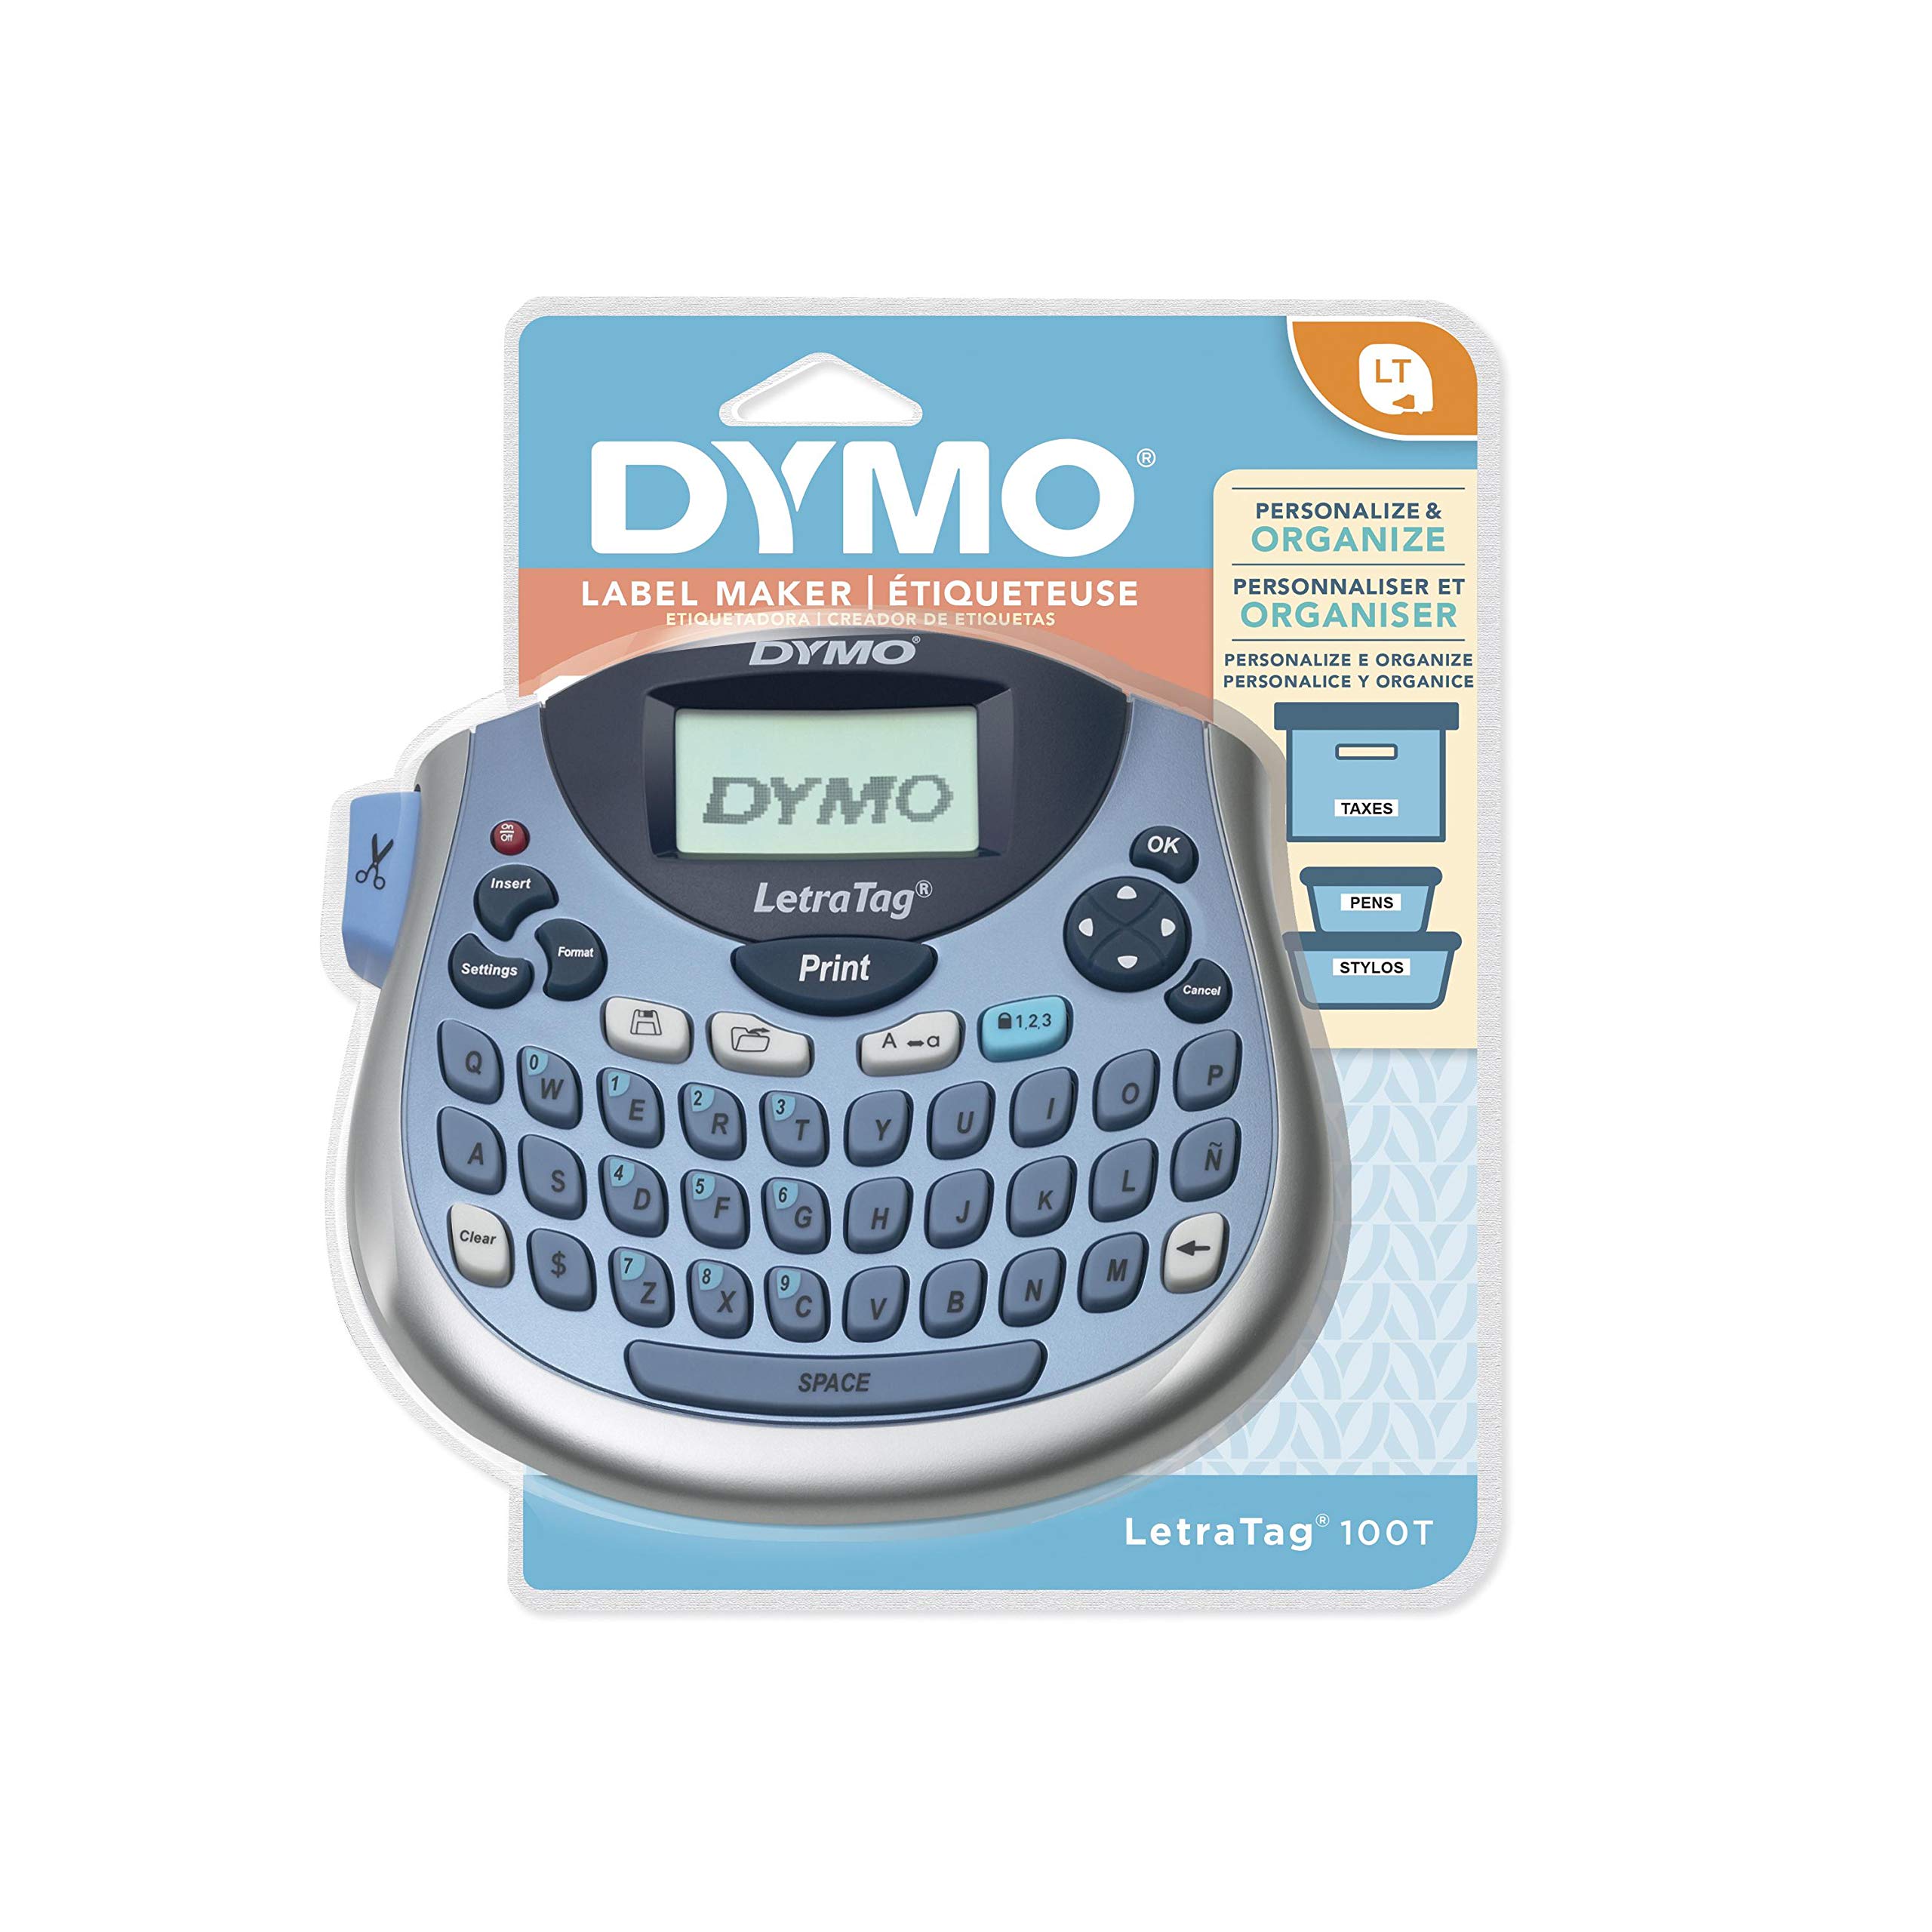 DYMO LetraTag LT-100T Plus Compact, Portable Label Maker with QWERTY Keyboard (1733013),Silver/Blue